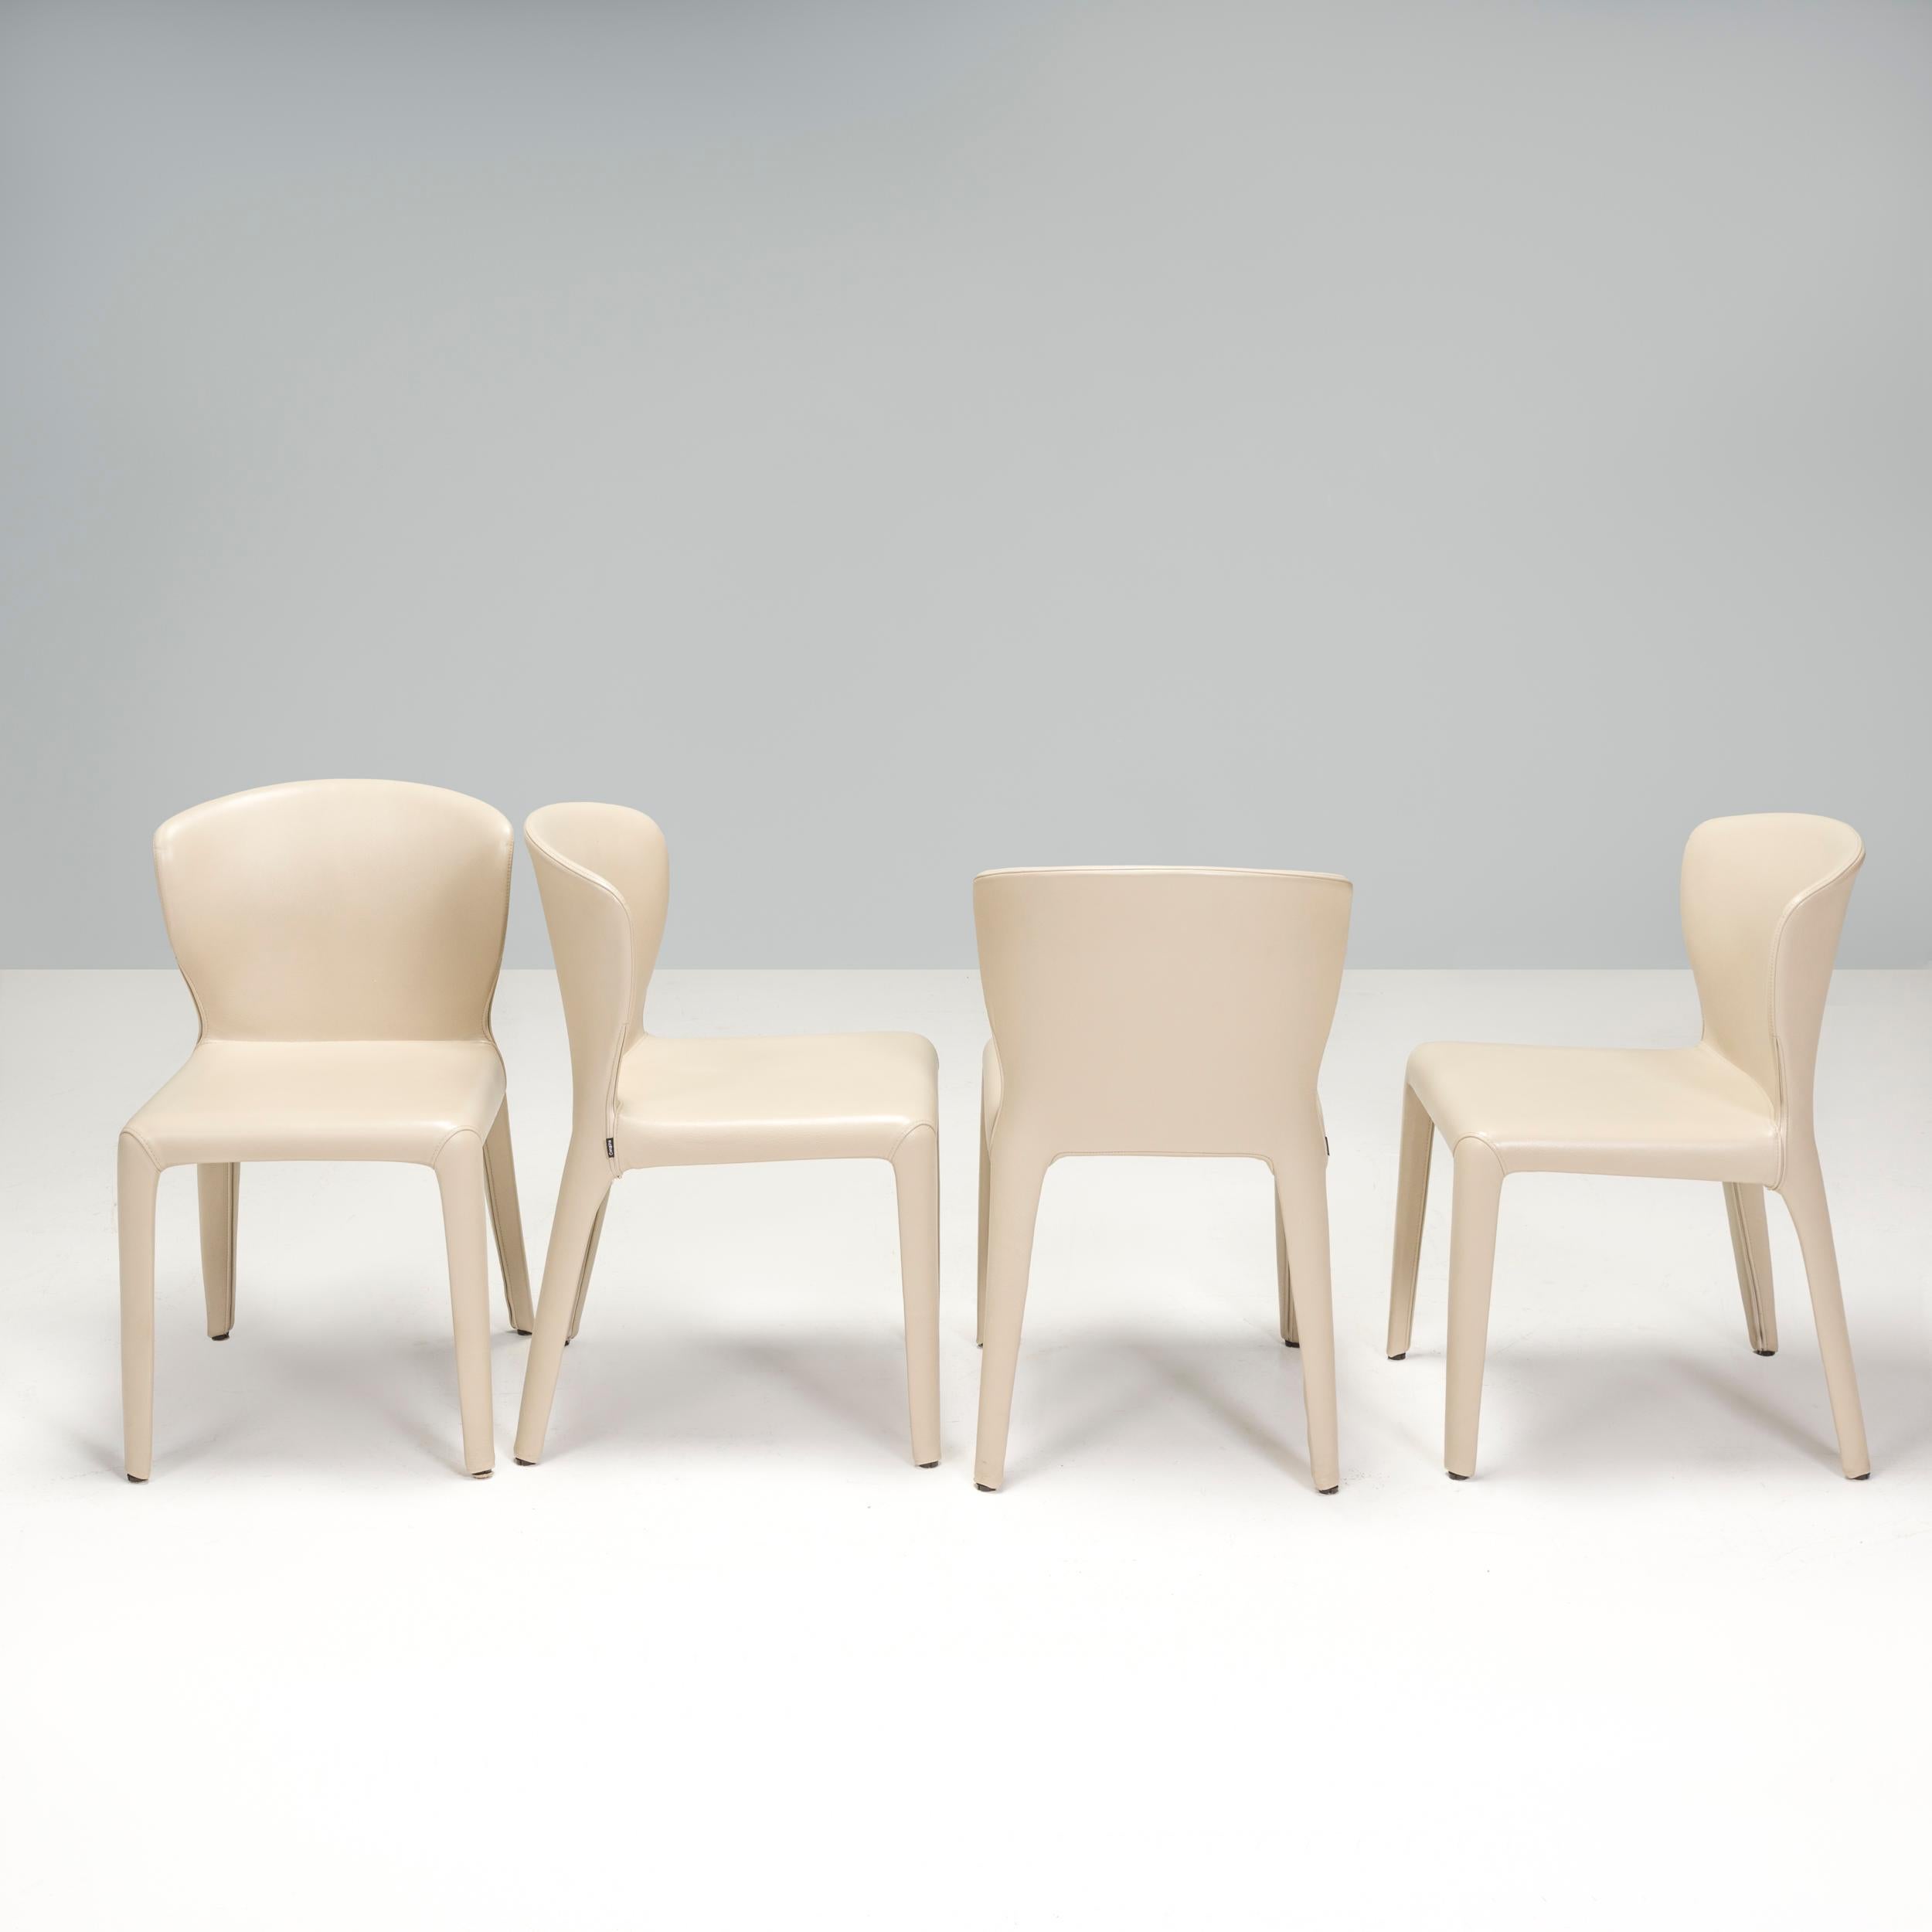 Italian Cassina by Hannes Wettstein 367 Hola Cream Leather Dining Chairs, Set of 4 For Sale